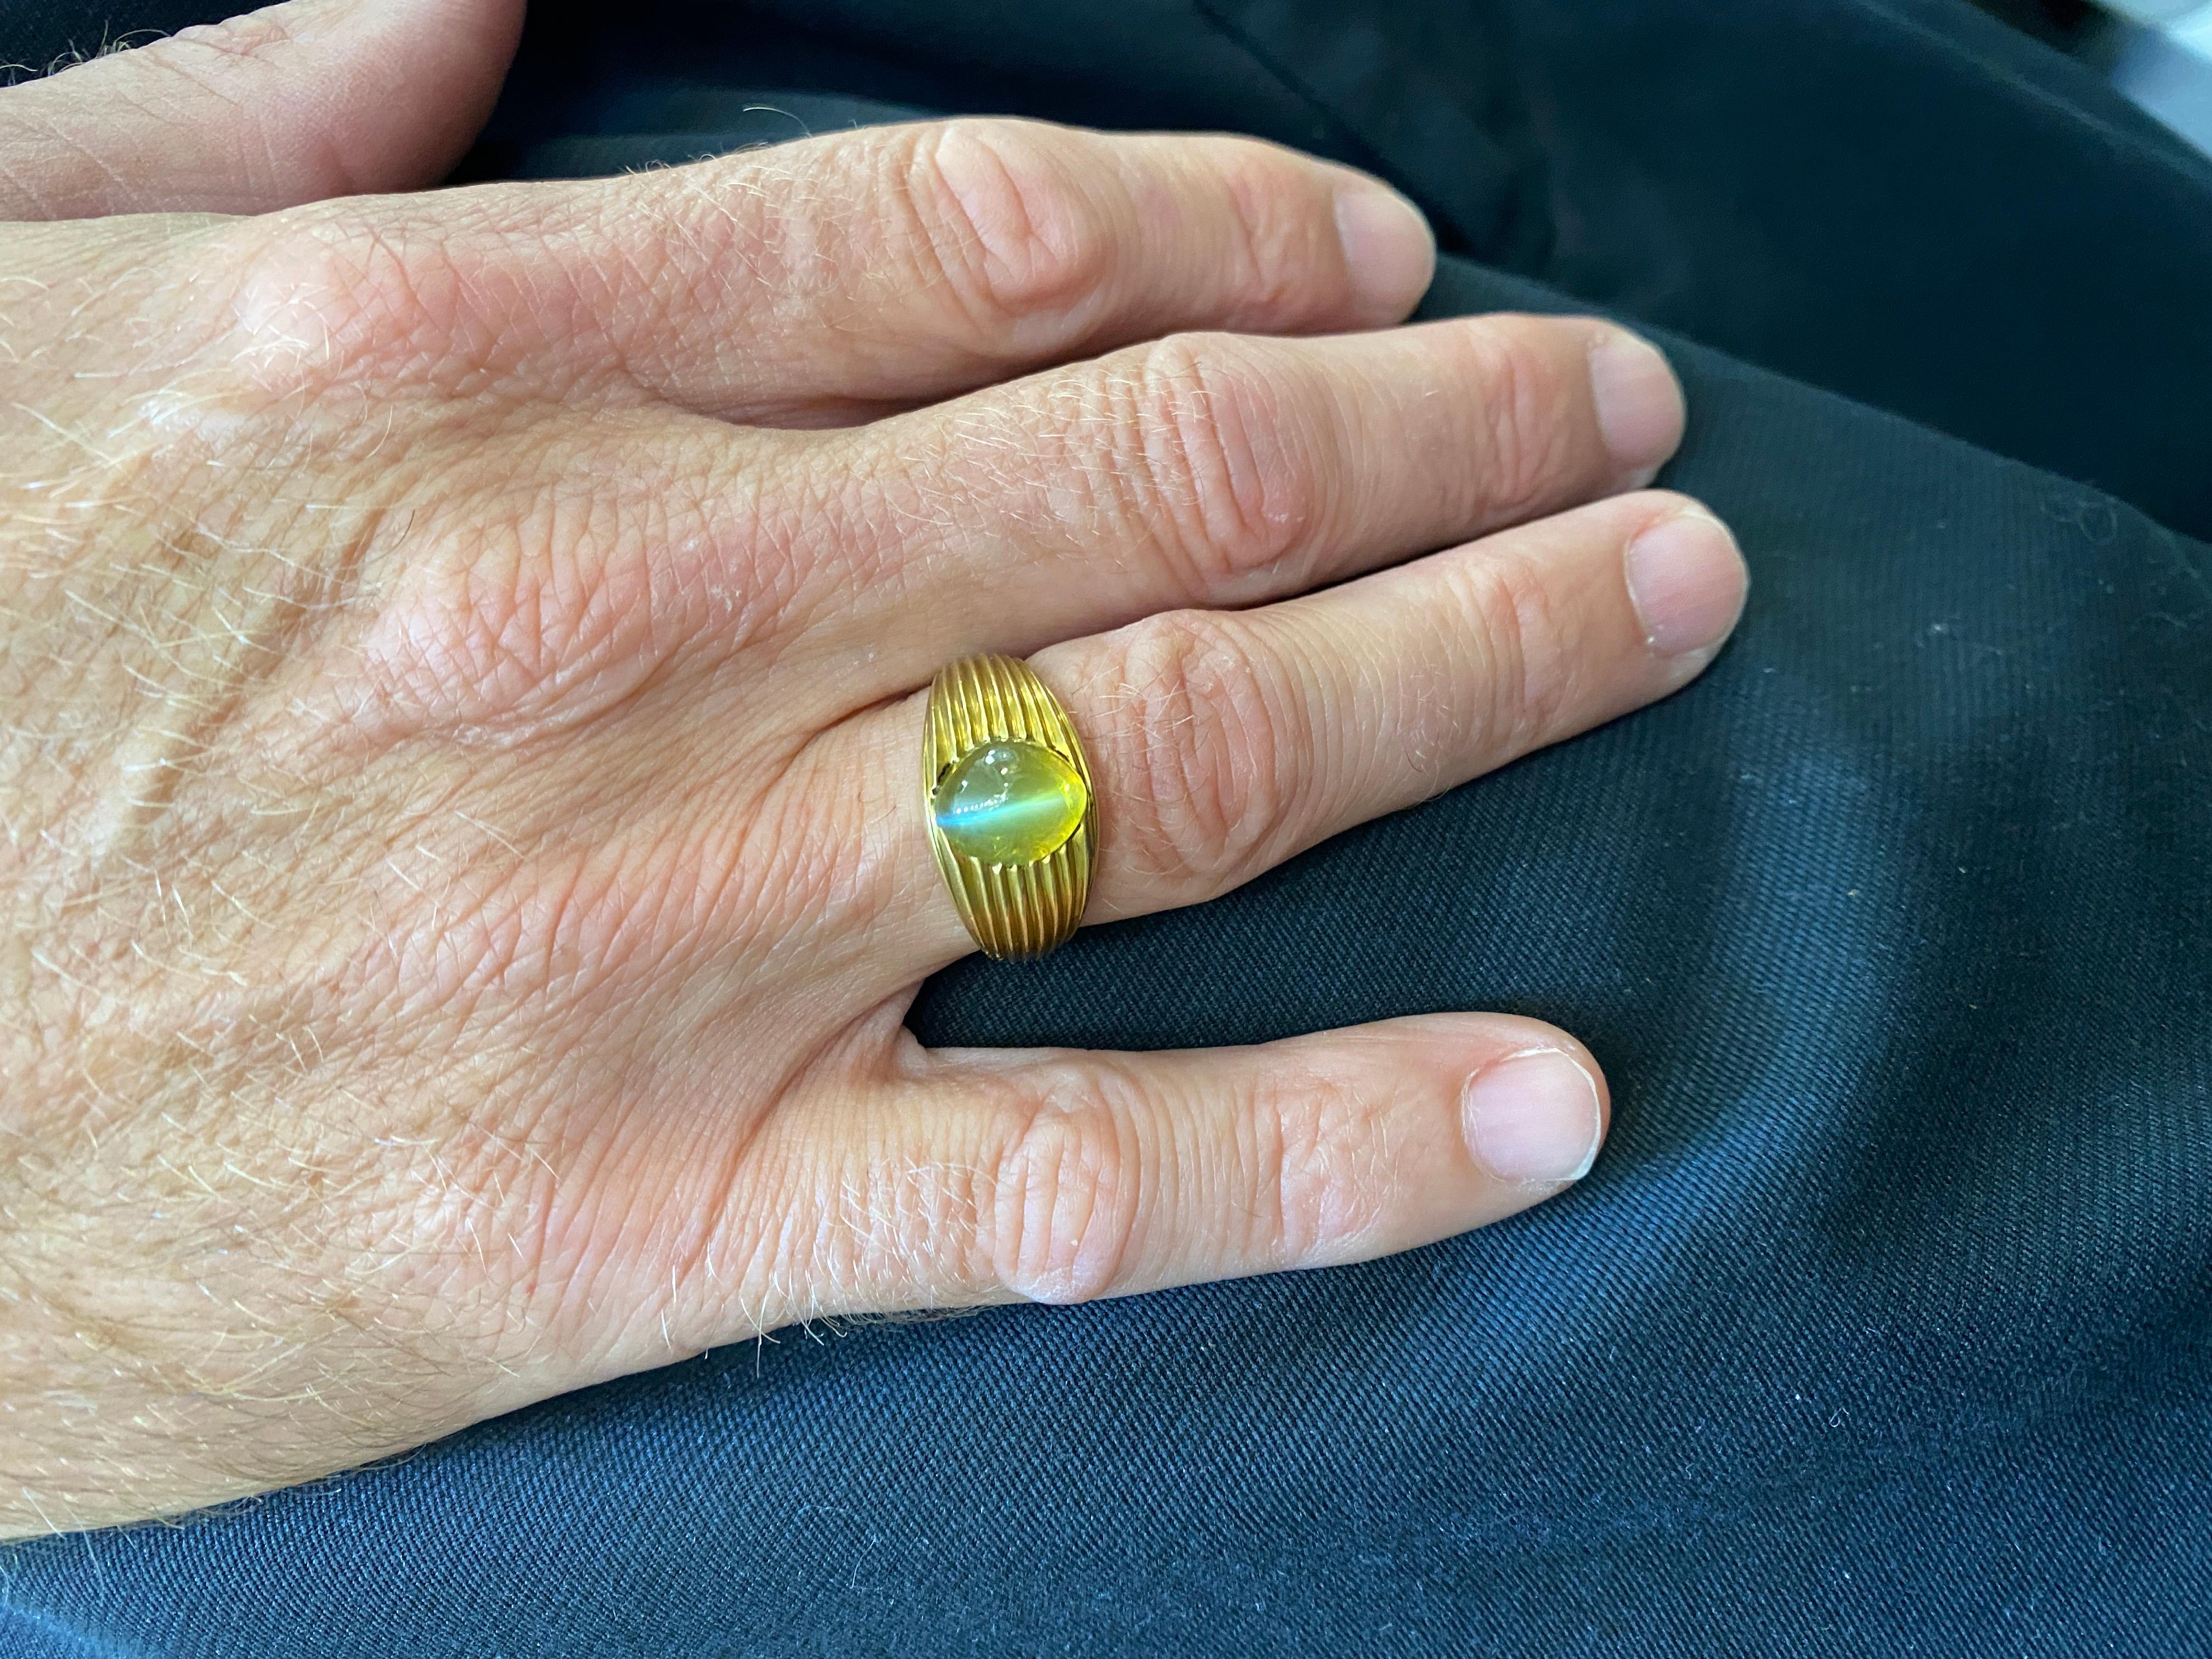 Cat's Eye chrysoberyl men's ring by designer J.E. Caldwell fashioned in 18 karat yellow gold. The Cat's Eye oval cabochon gemstone weighs approximately 6.0 carats and is certified by the AGL. There has been no treatment or enhancement to the